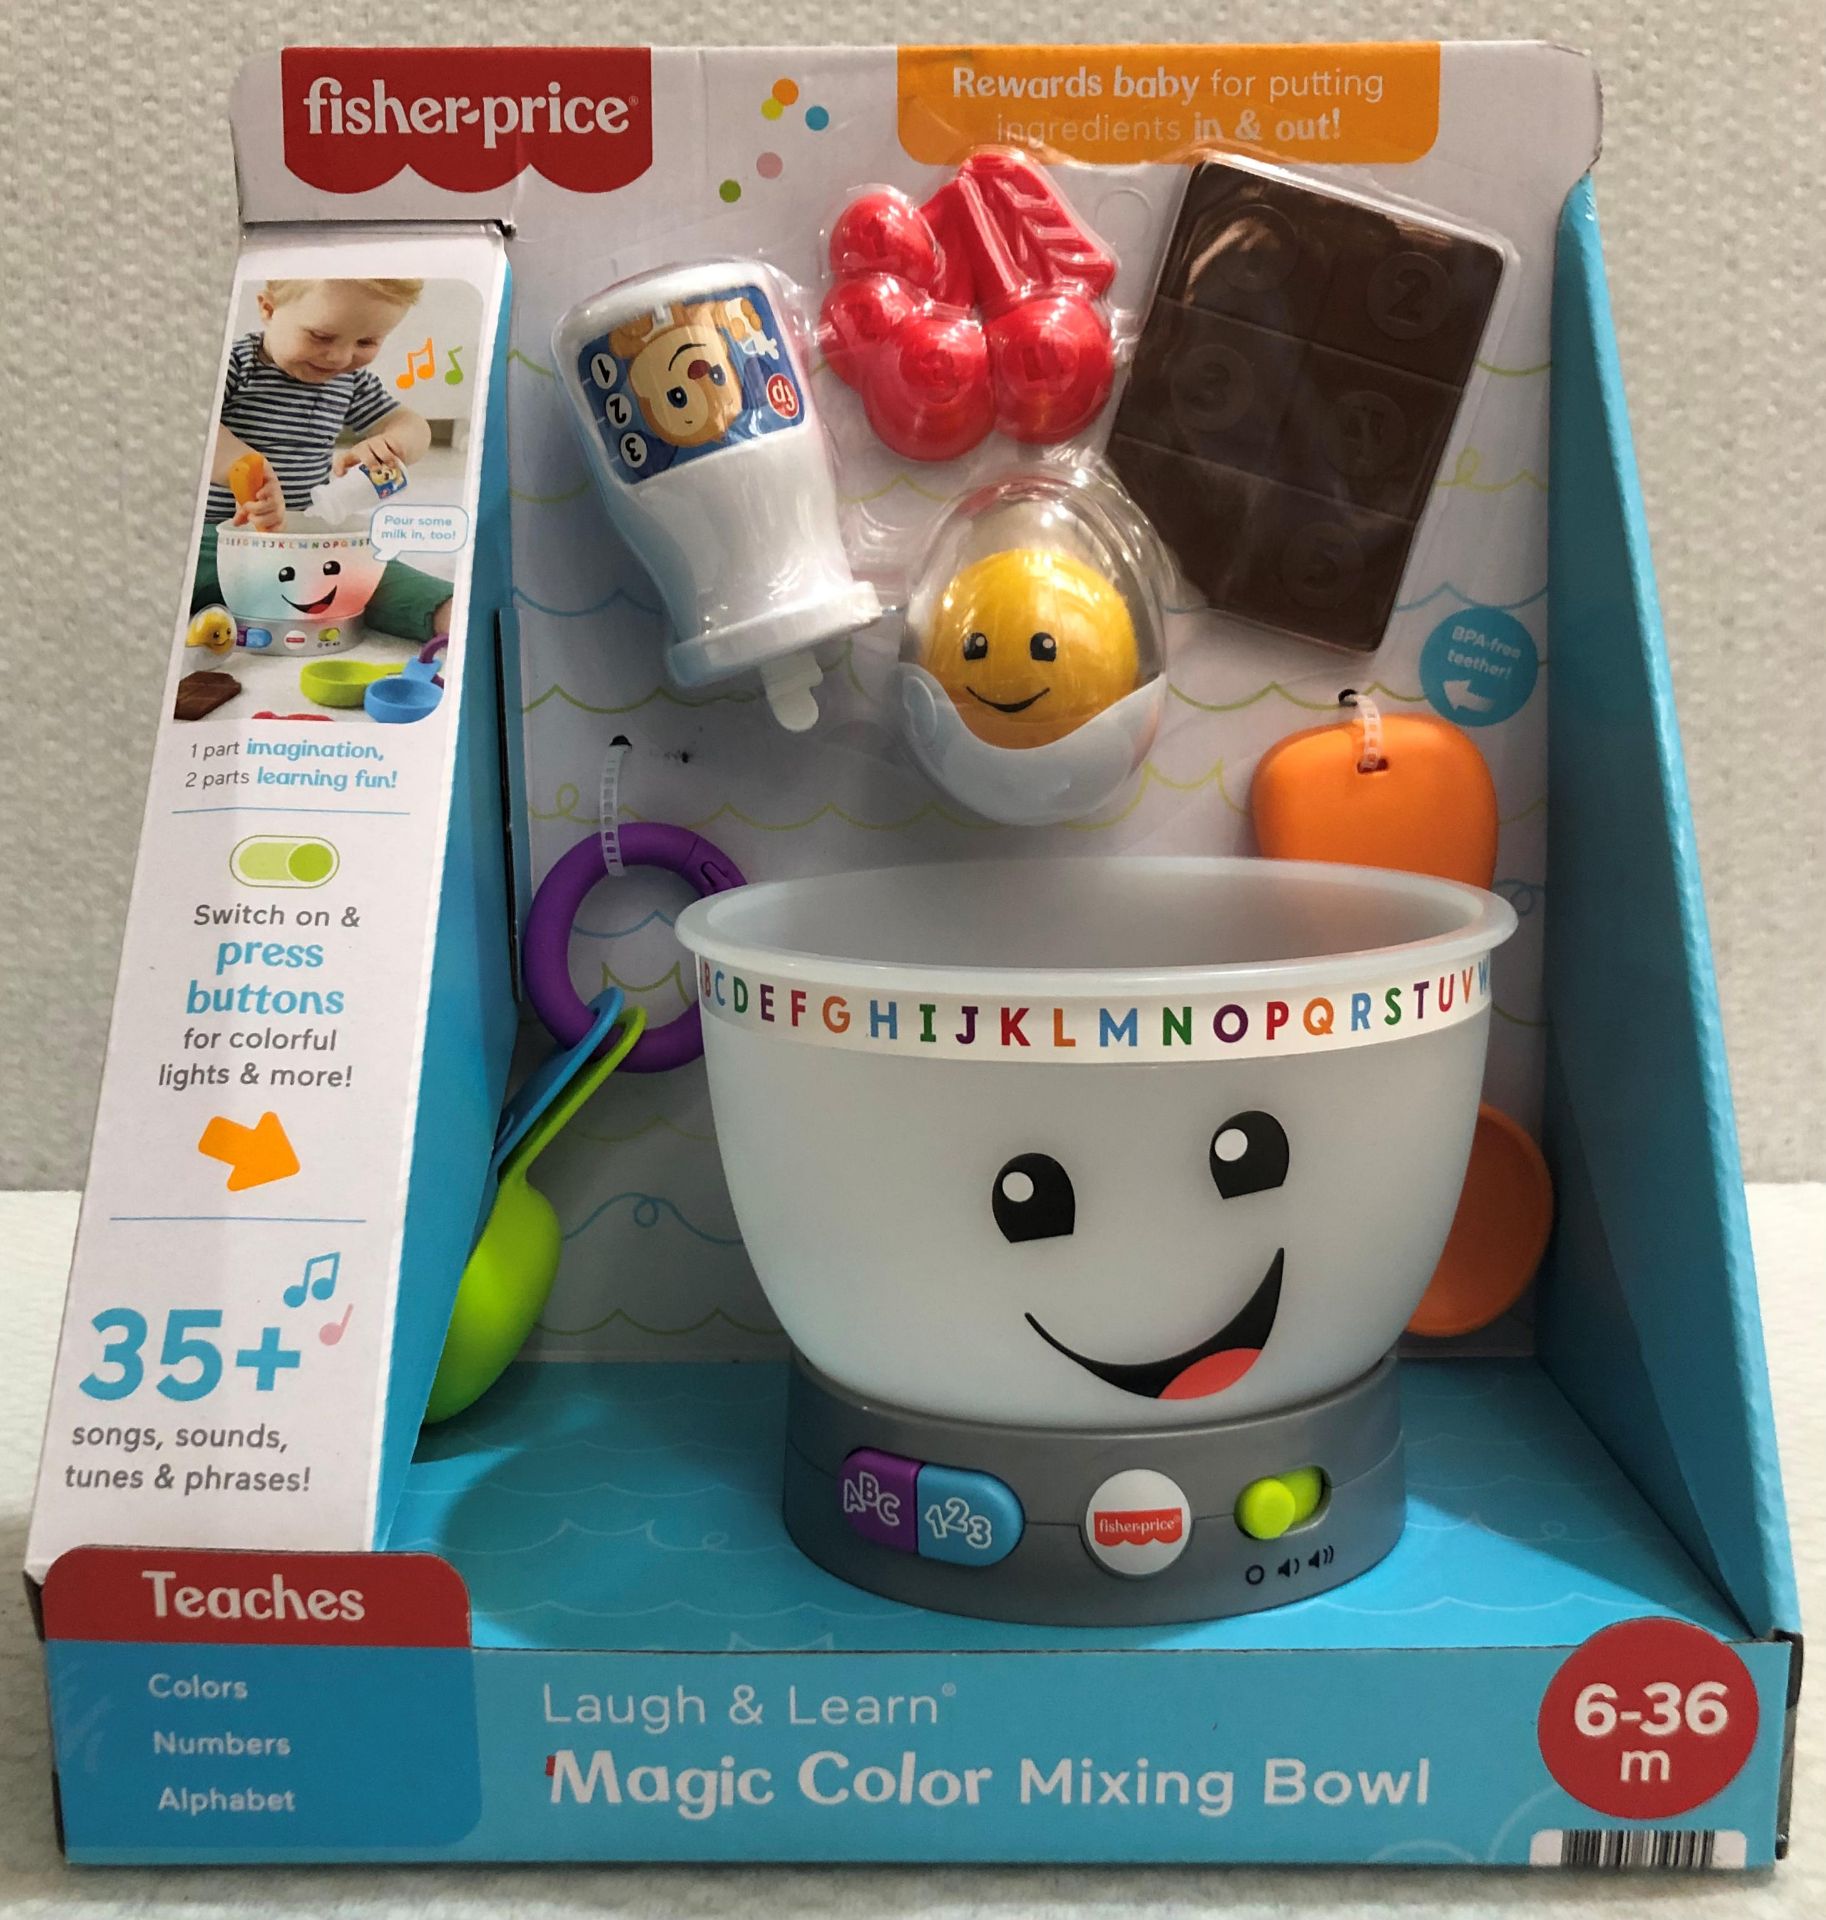 1 x Fisher Price Laugh & Learn Magic Color Mixing Bowl - New/Boxed - HTYS301 - CL987 - Location: - Image 2 of 4